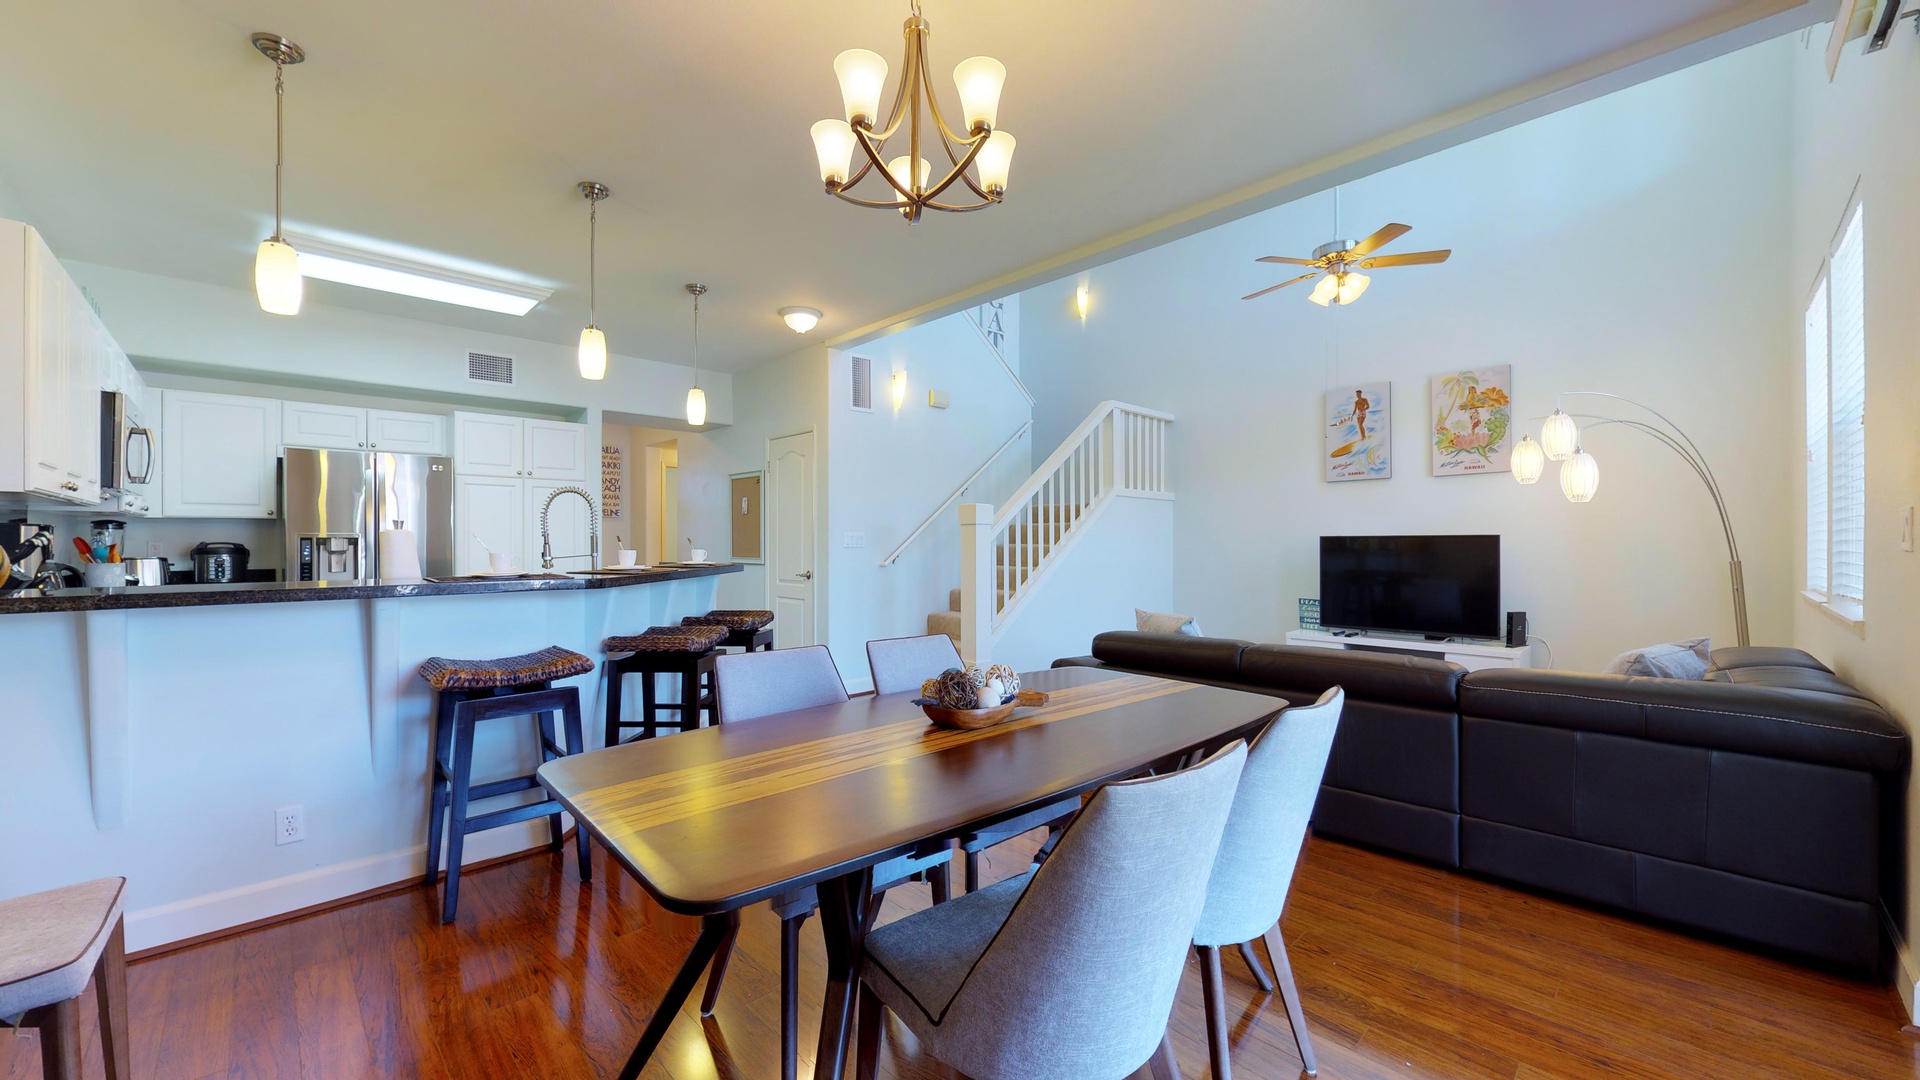 Kapolei Vacation Rentals, Ko Olina Kai 1035D - An open floor plan for the kitchen, dining and living areas and stairs.